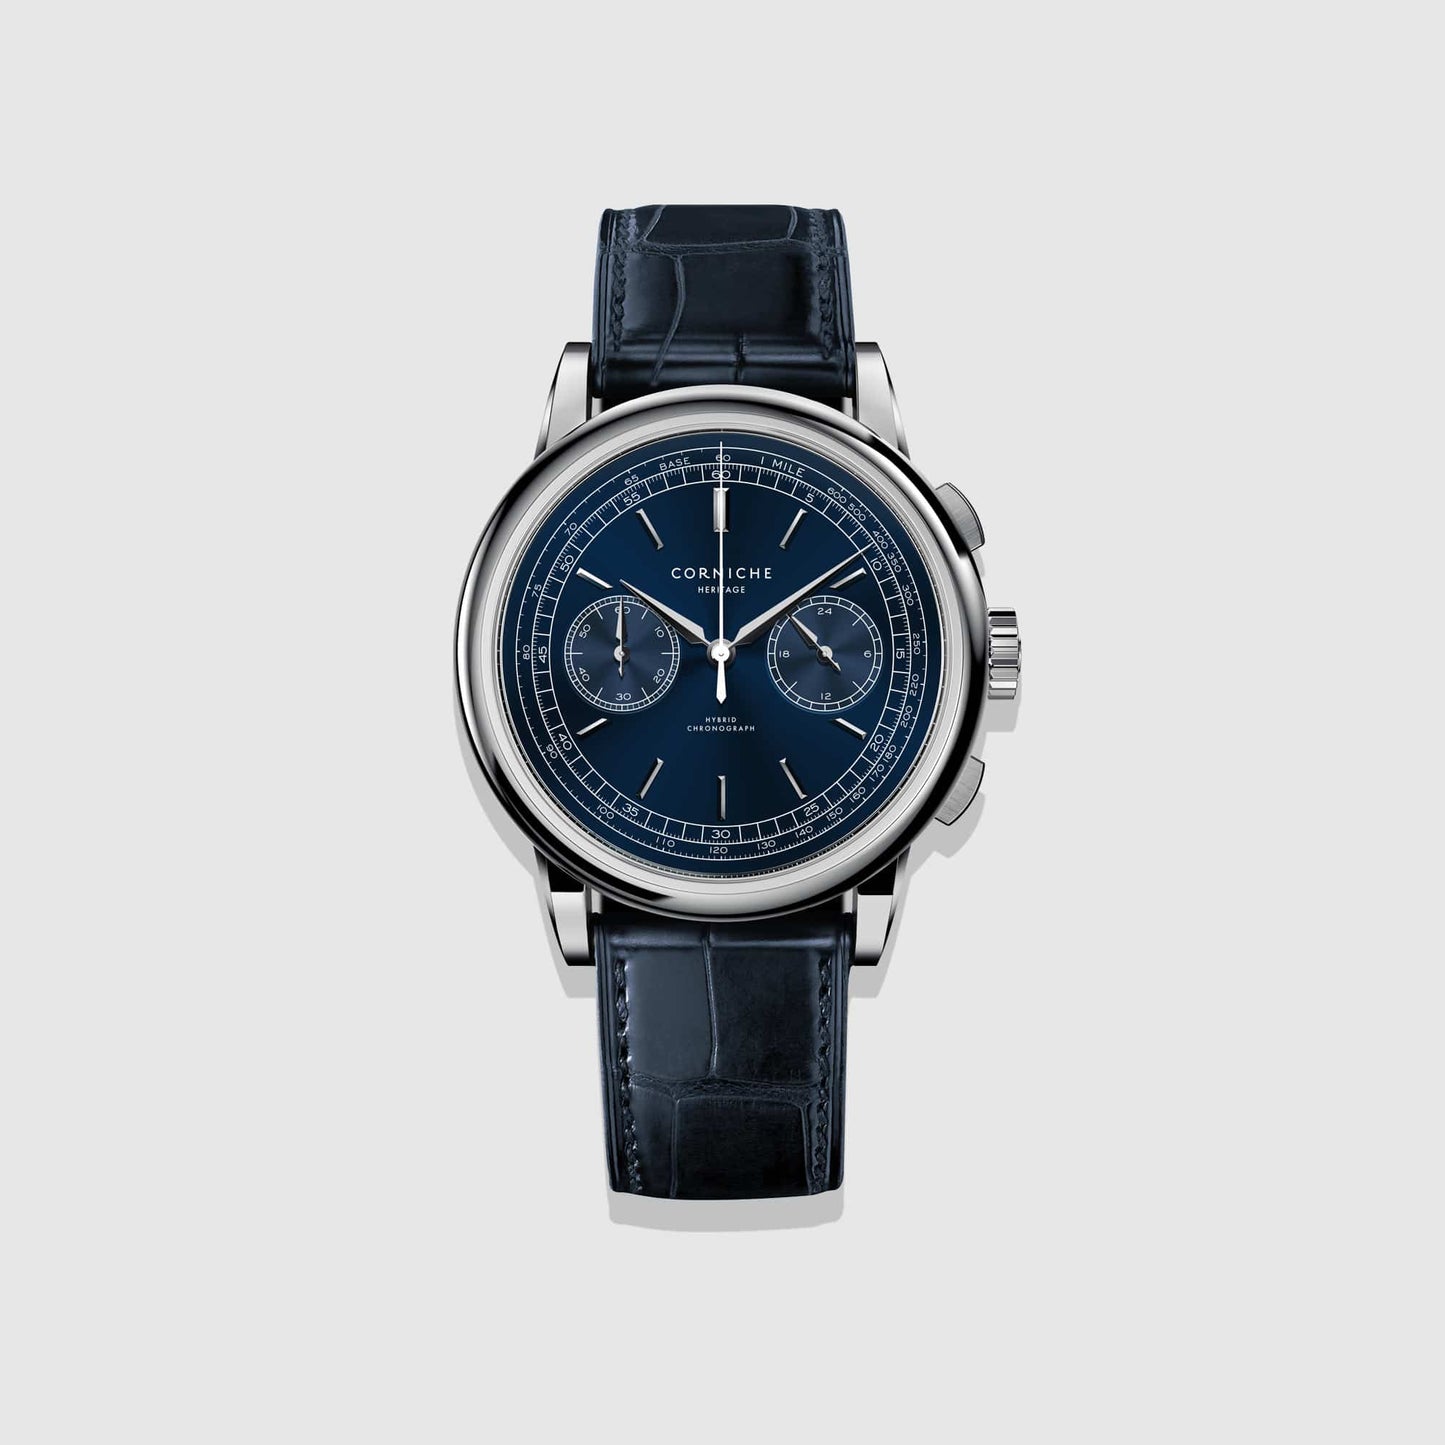 Corniche Chronograph Héritage men's watch in steel with blue dial